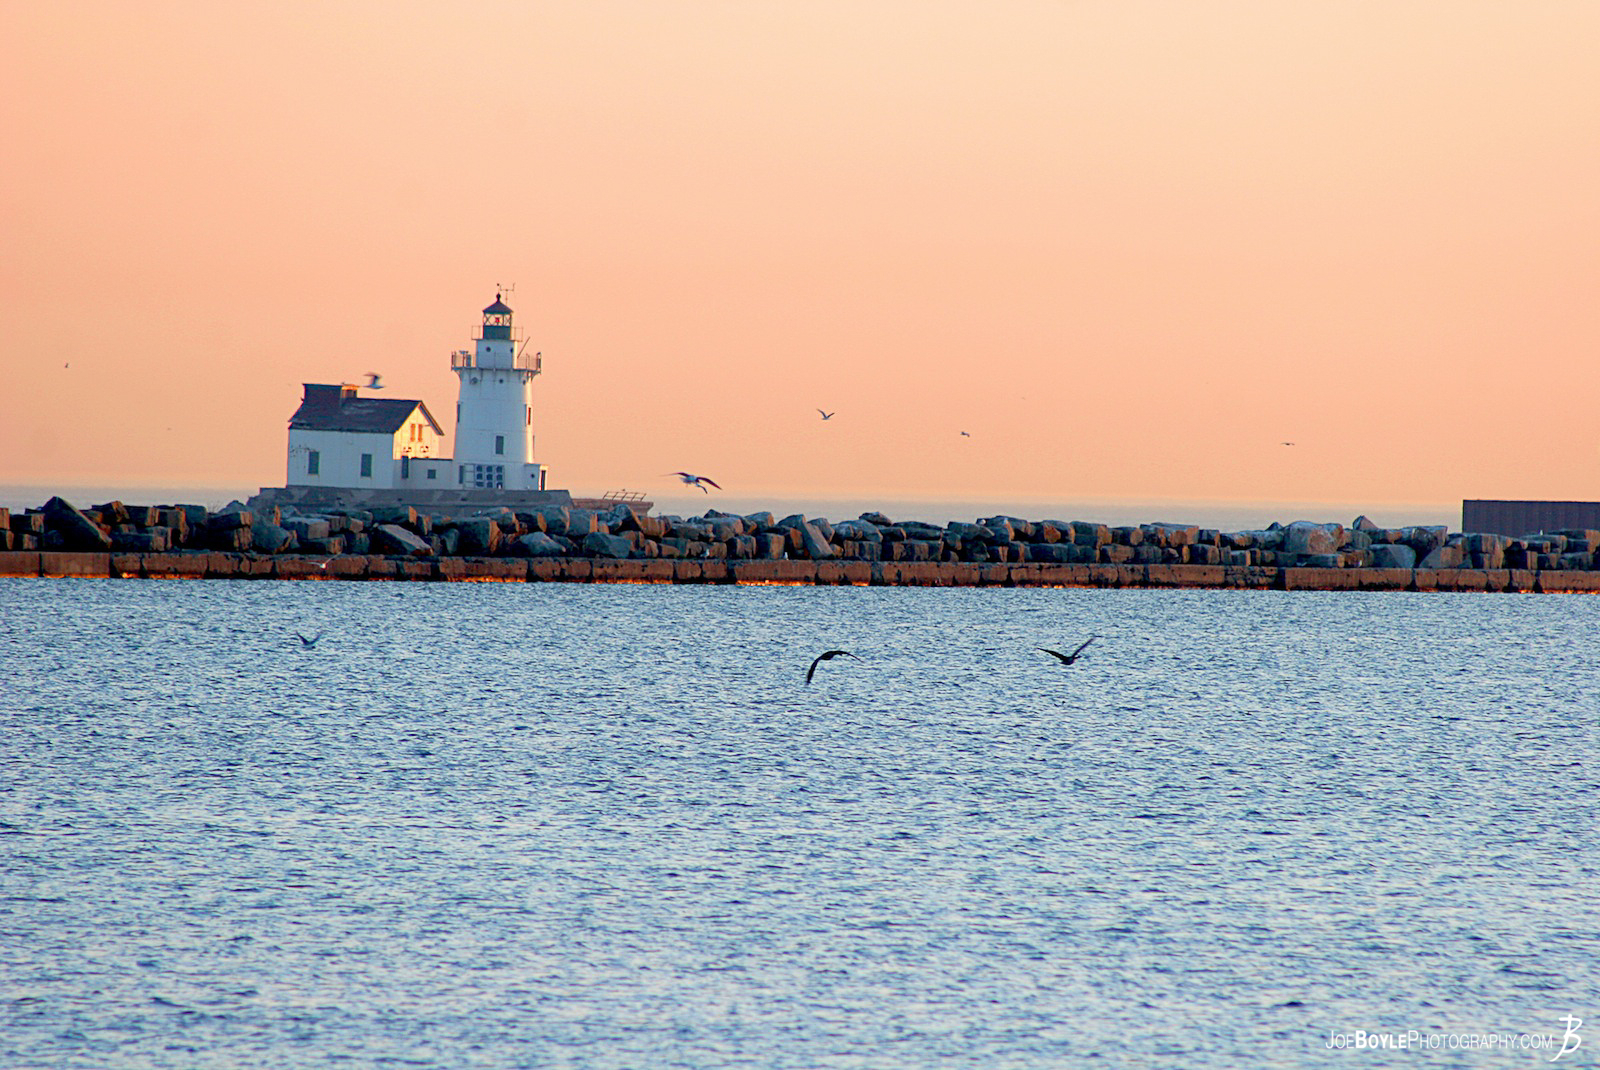  I captured this image in the early morning hours when I was actually trying to take a picture of the Cleveland Skyline. As I was shooting towards the city I turned around and saw this! The lighthouse is located off the shore of Lake Erie in Cleveland, Ohio. 